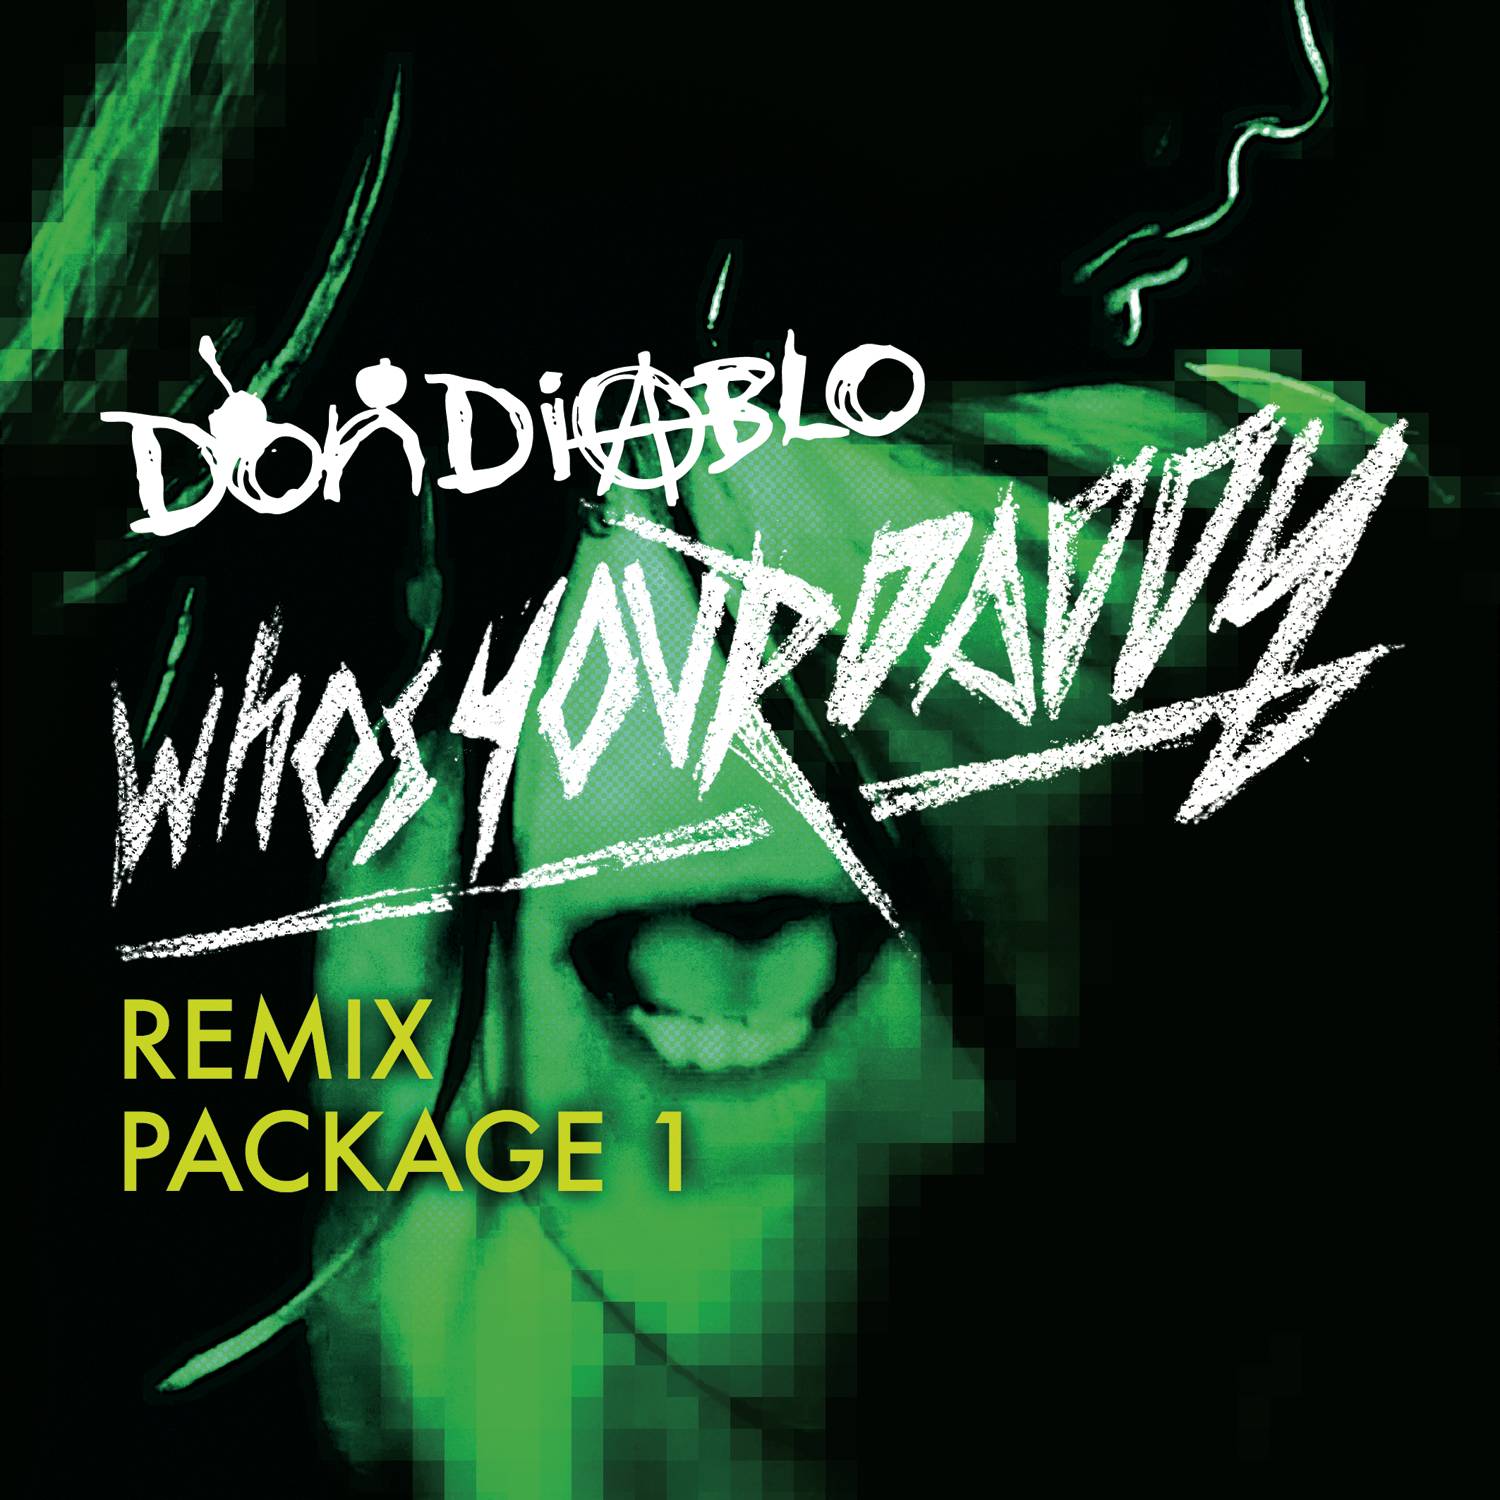 Who's Your Daddy - A.Skillz Remix